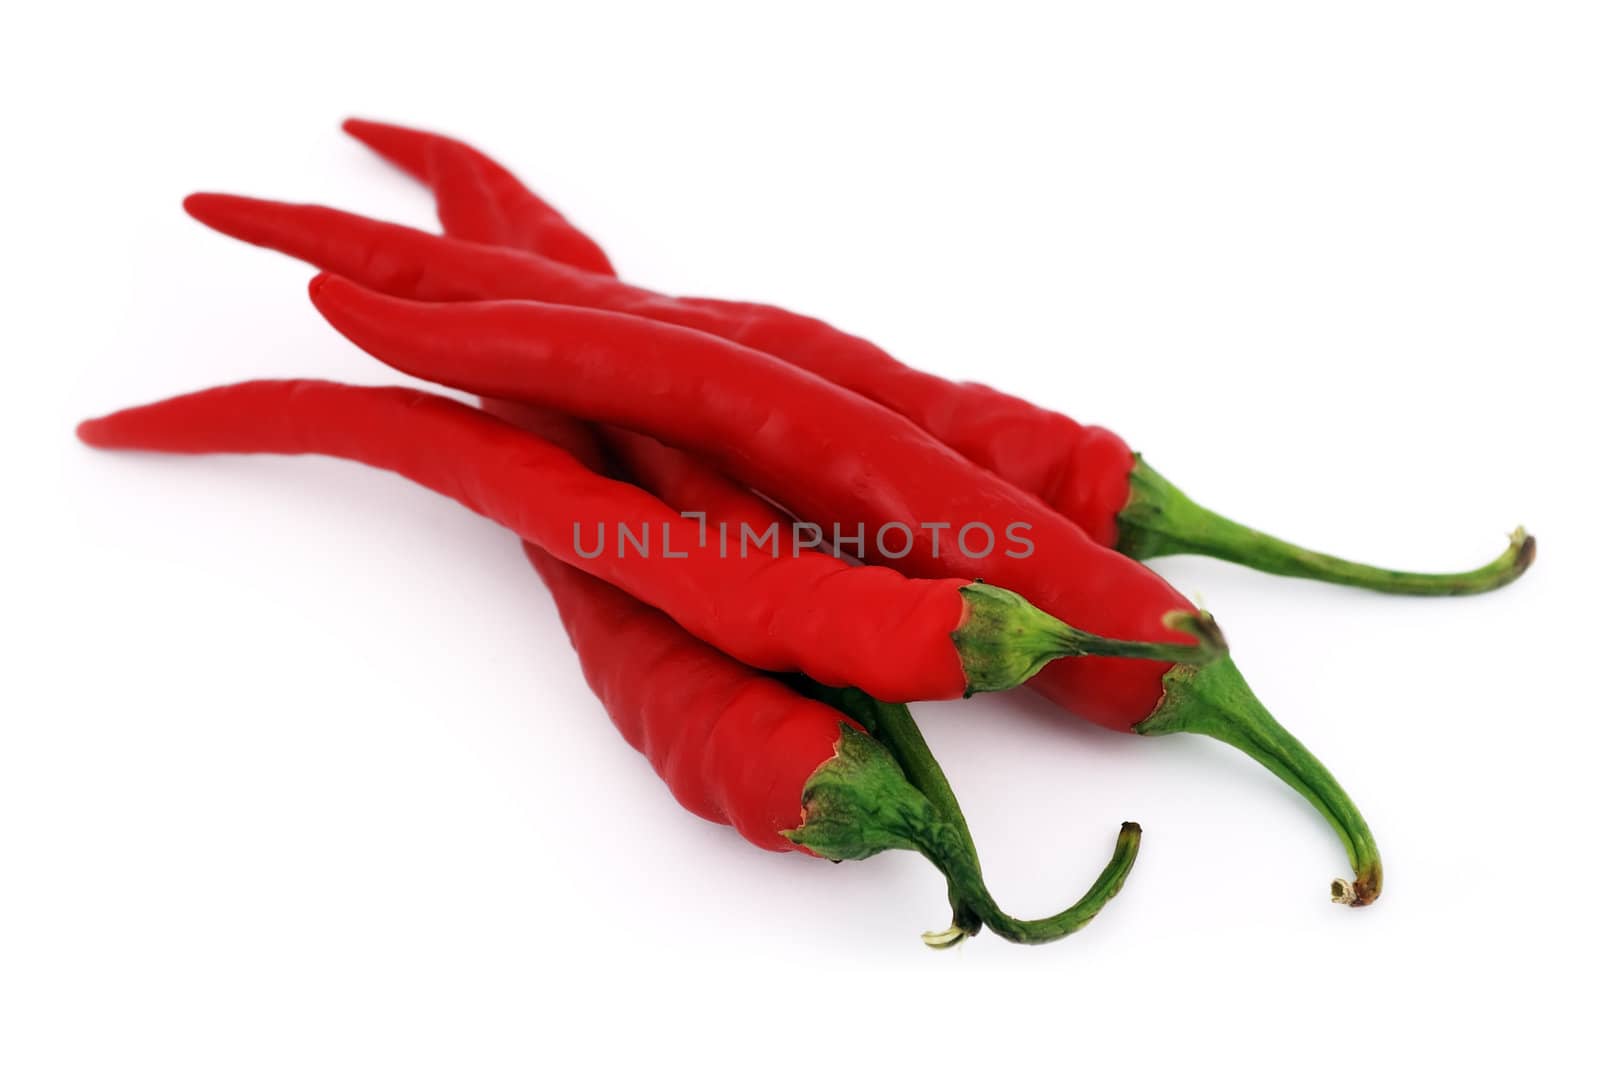 red chilli peppers on white background